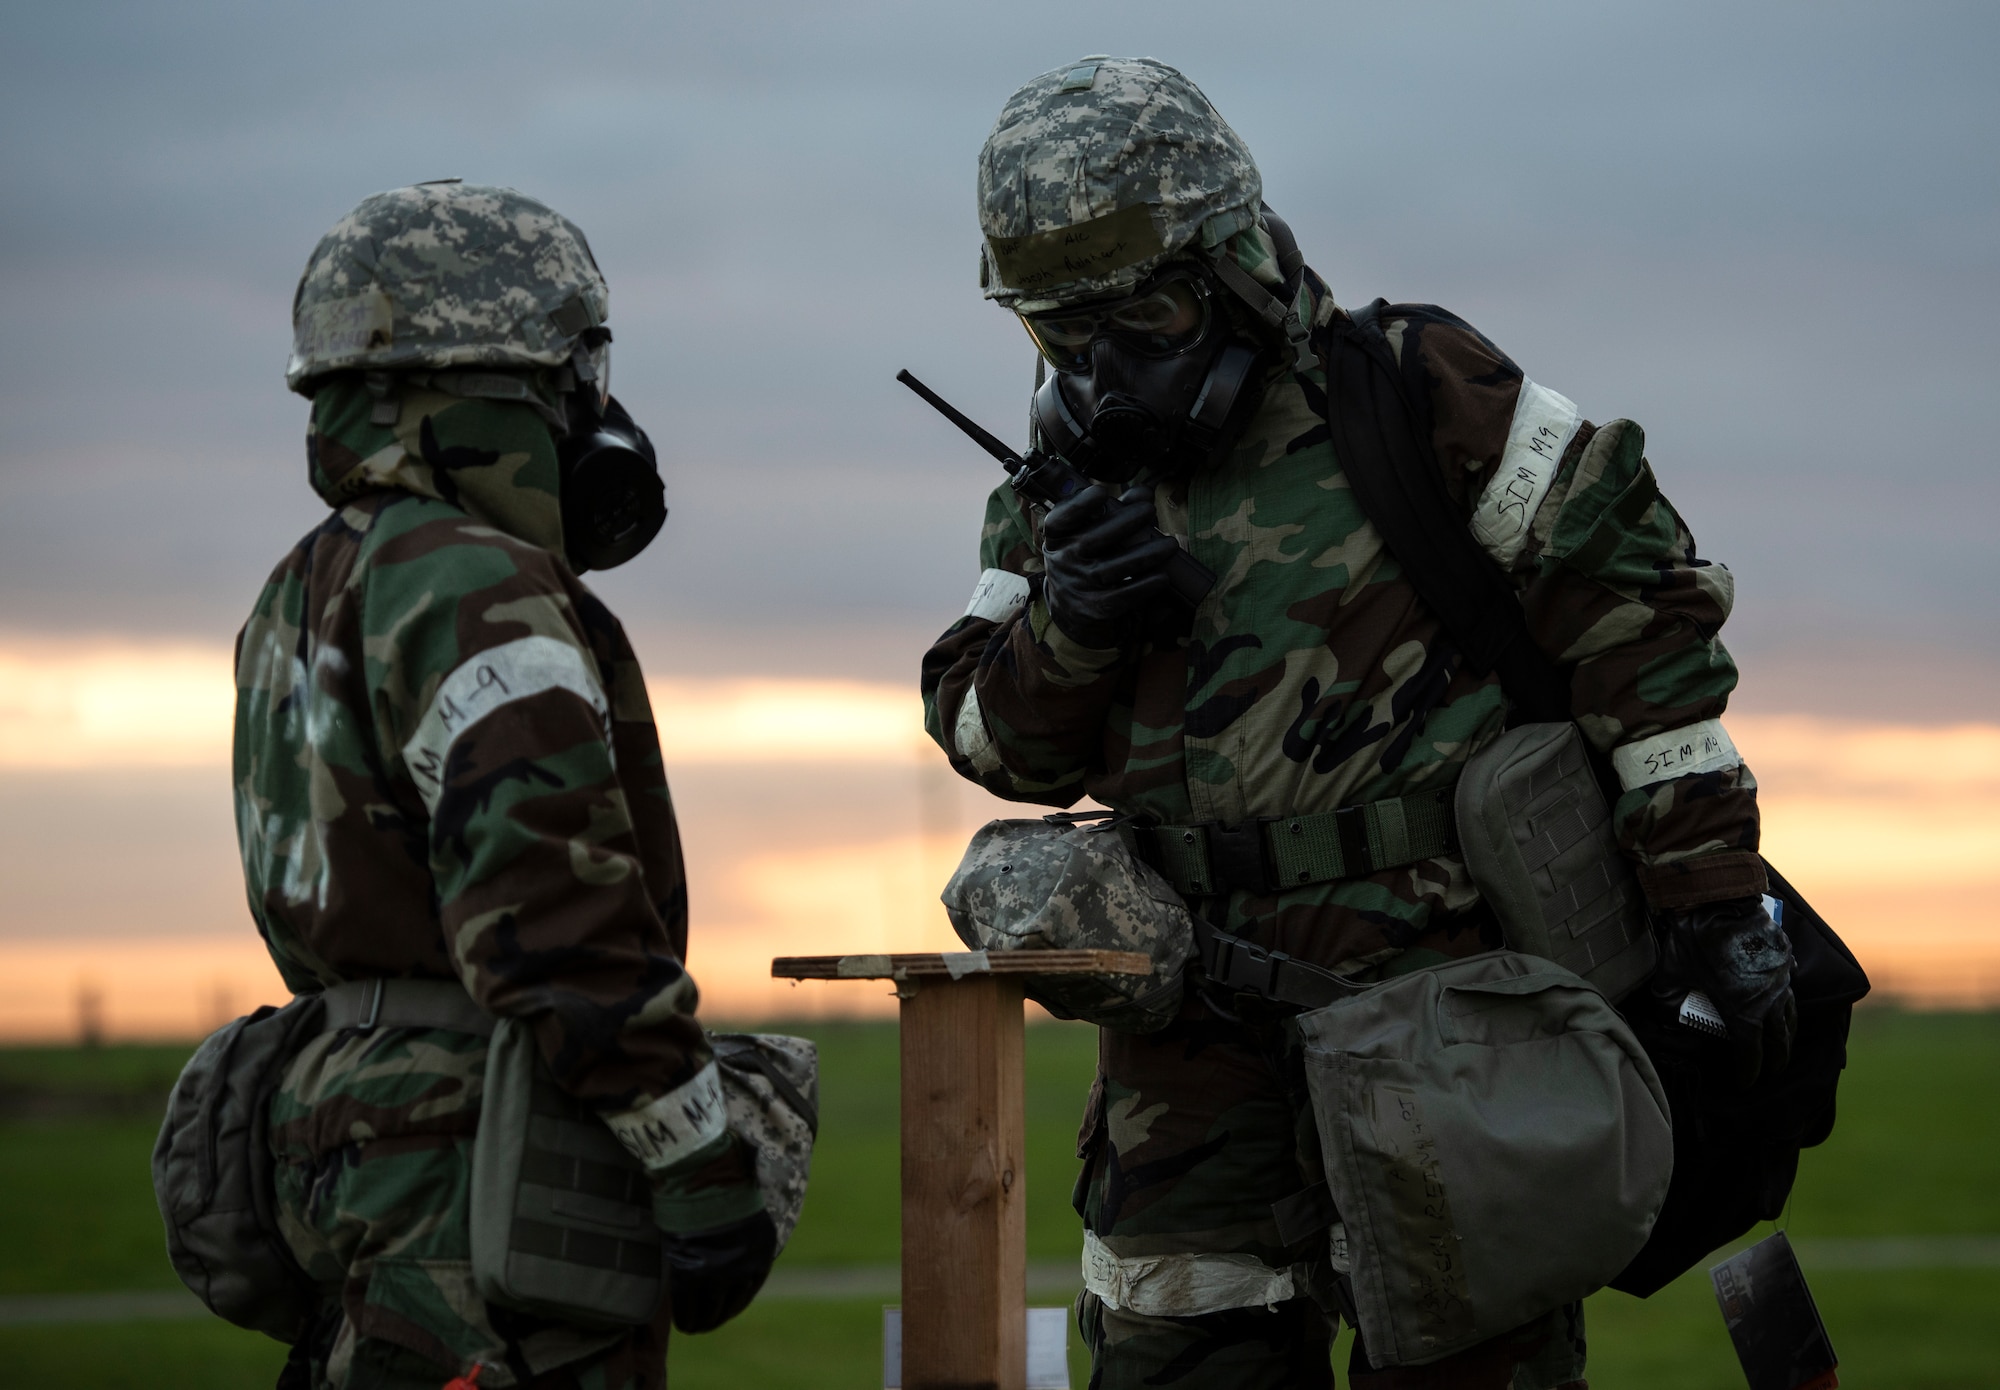 U.S. Air Force Airmen assigned to the 48th Civil Engineering Squadron perform post-attack reconnaissance sweeps during a readiness training at Royal Air Force Feltwell, Nov. 4, 2020. CES Airmen must maintain the ability to operate in all contingency environments through teamwork and practical application. (U.S. Air Force photo by Airman 1st Class Jessi Monte)